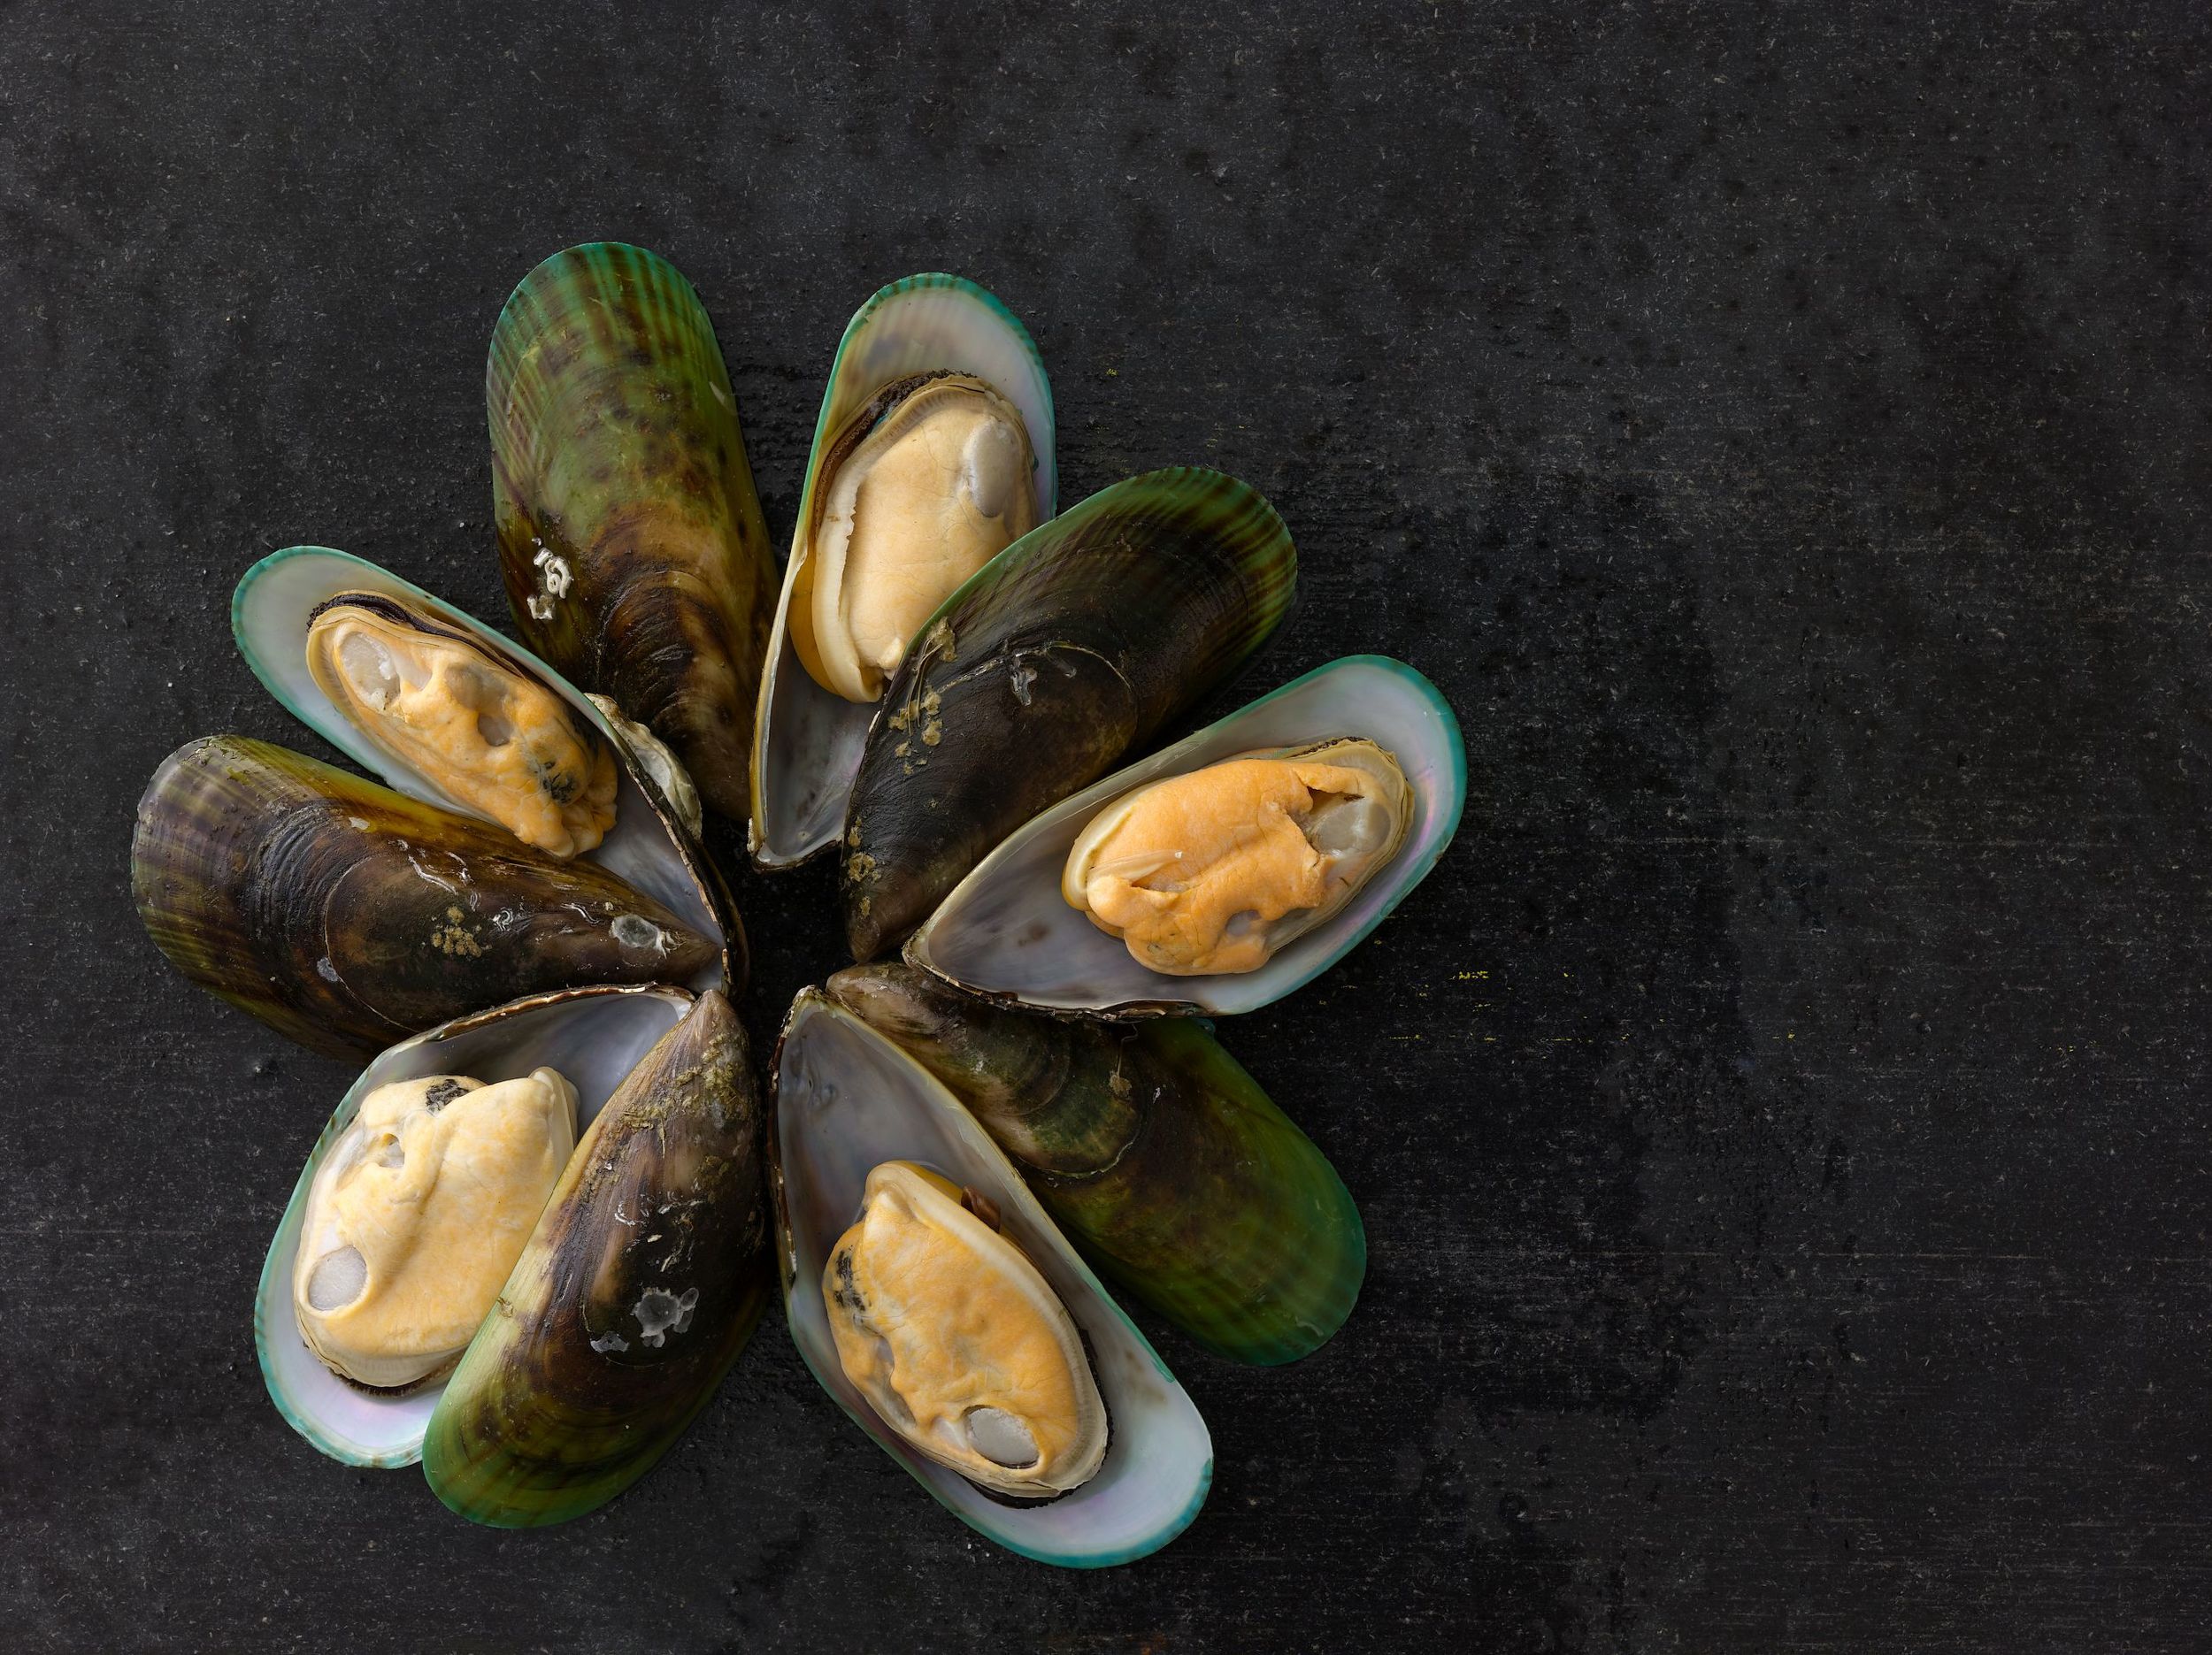   Excellence &amp;&nbsp;Responsibility    PREMIUM SEAFOOD    New Zealand Mussels  